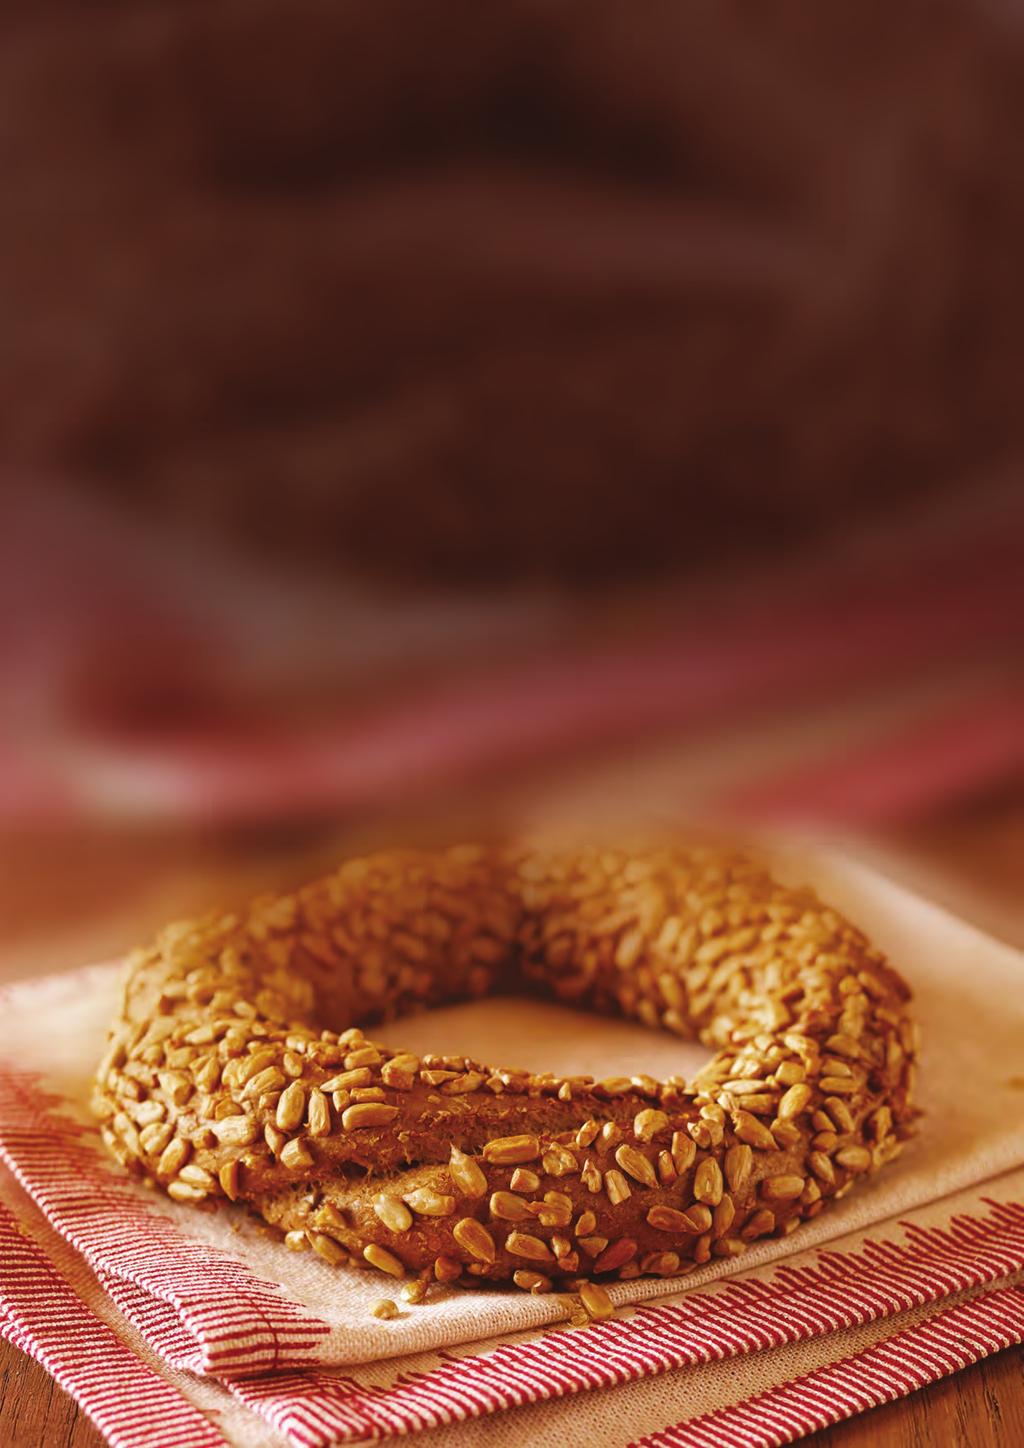 Turkish Multigrain Simit Simit, often decribed as the Turkish bagel, is a ring shaped bread, made with stone-ground wheat flour and encrusted with sesame seeds (or sesame bathed).